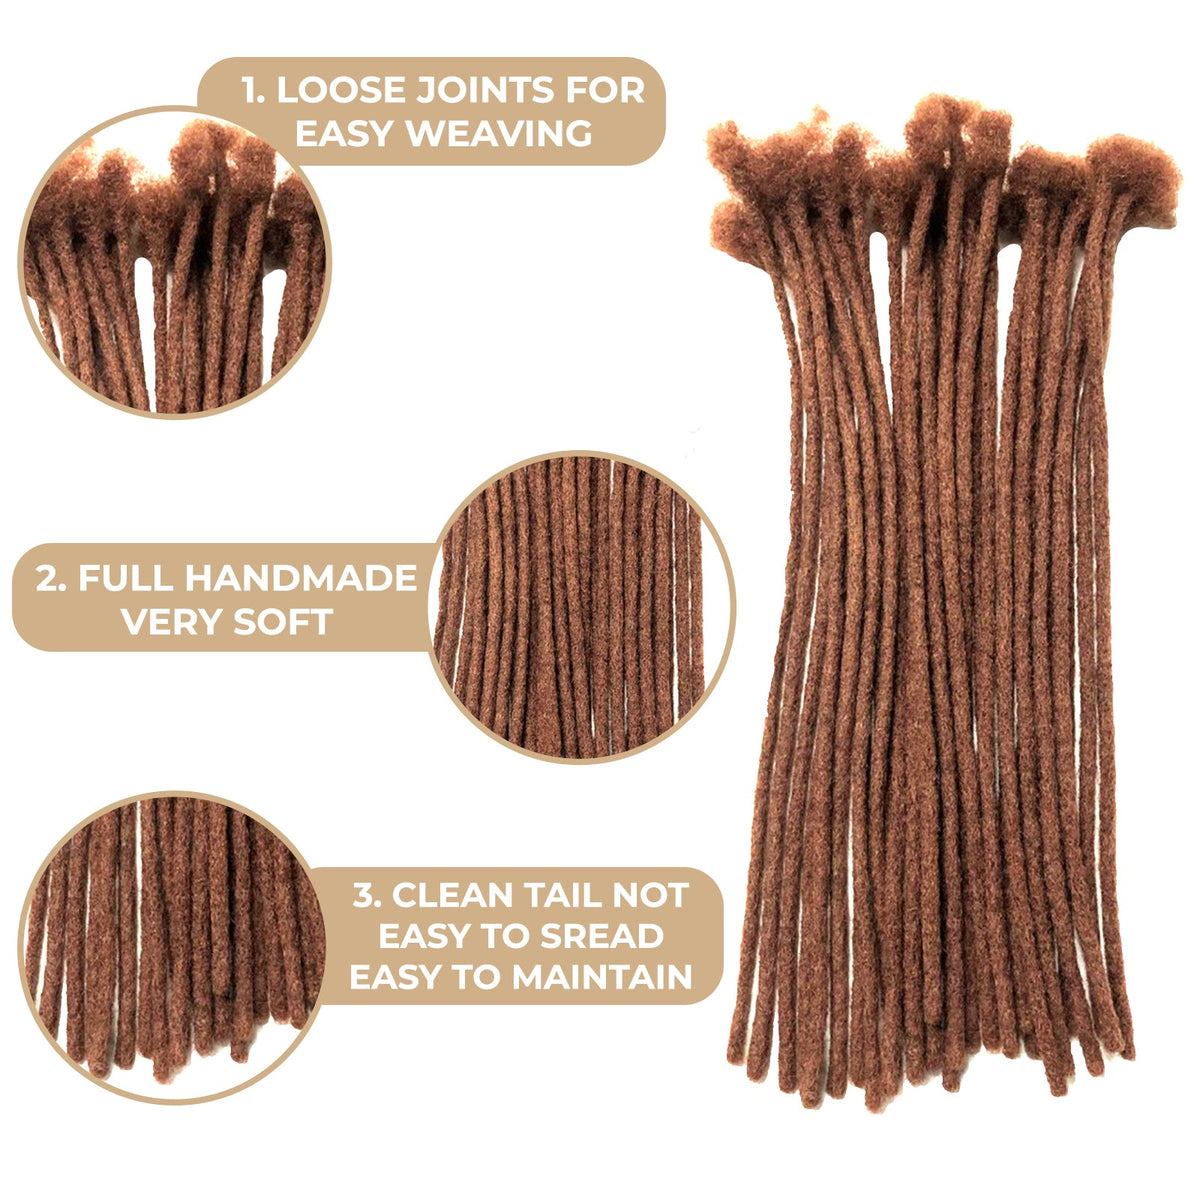 100% Human Hair Dreadlock Extensions 8 Inch 10 Strands Handmade Natural Loc Extensions Human Hair Bundle Dreads Extensions For Woman & Men Can Be Dyed/Bleached (Brown / 33, 8 inch length 0.4 cm Width